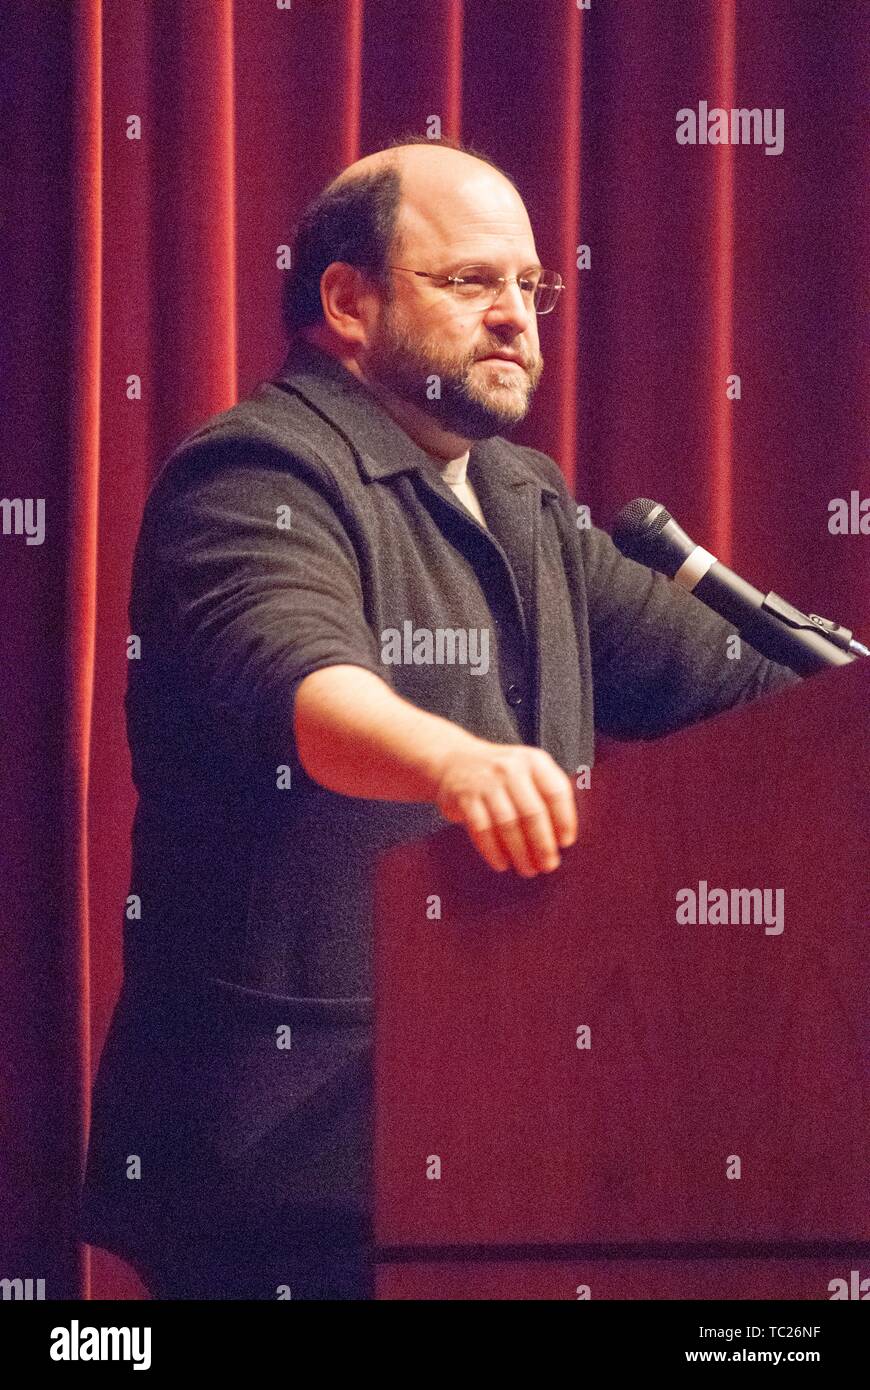 Three-quarter profile shot of actor and comedian Jason Alexander standing behind a podium during a Milton S Eisenhower Symposium, Homewood Campus of Johns Hopkins University, Baltimore, Maryland, October 13, 2006. From the Homewood Photography Collection. () Stock Photo